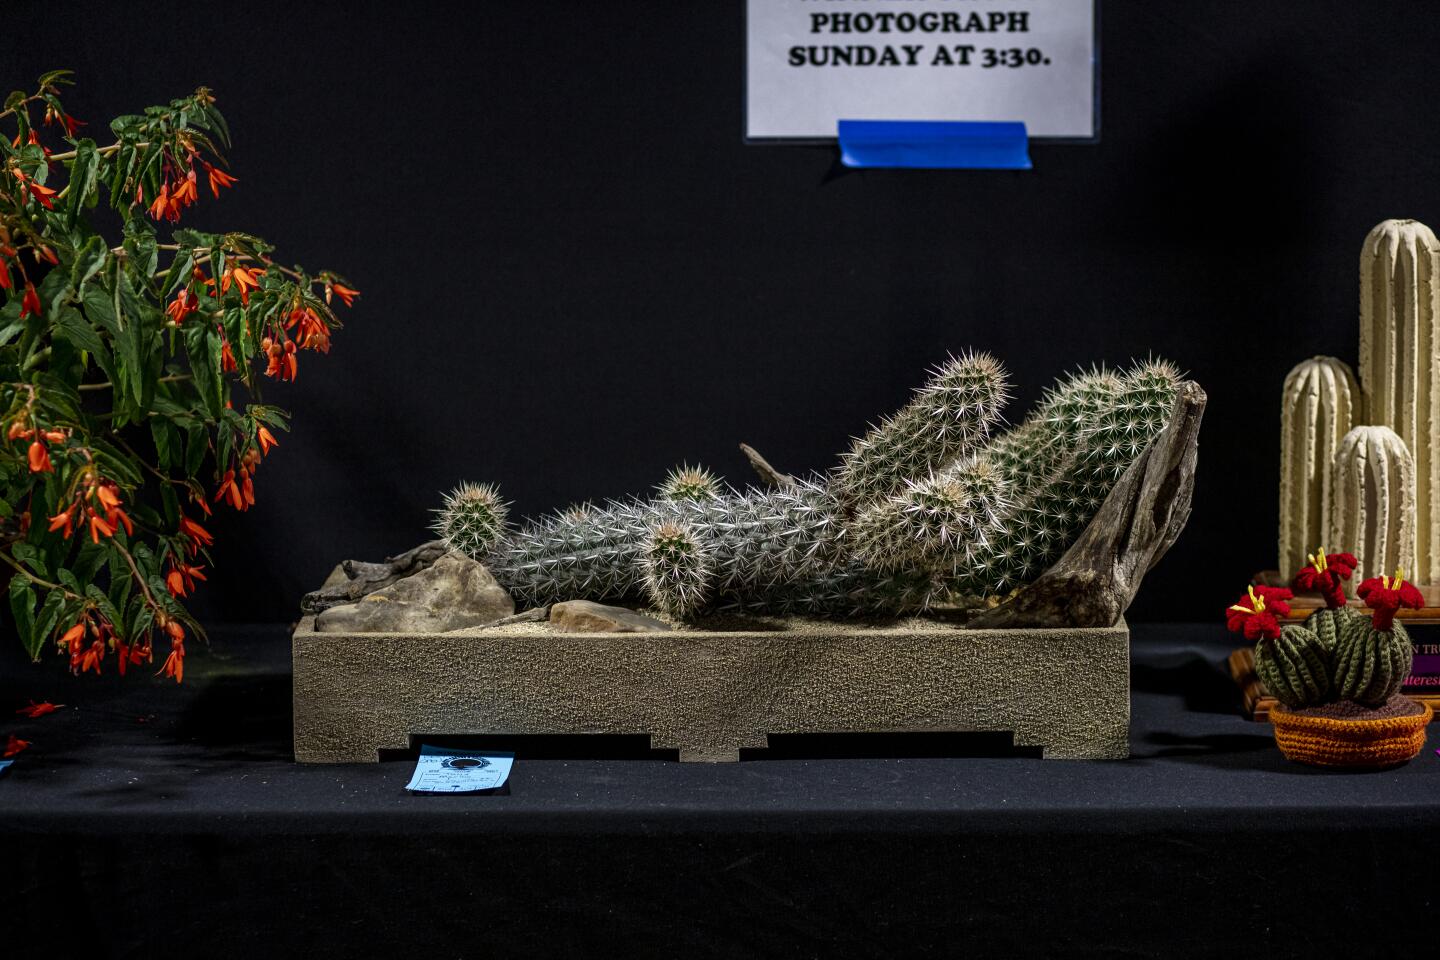 Hobbyist Tony Marino of Chino makes custom cabinets by day but his passion is succulents and cactus. His creeping devil cactus (Stenocereus eruca) was one of the convention's top trophy winners, in a special pot he built years ago from recycled carpet padding. This Mexican cactus was about eight inches long when he bought it about 10 years ago. He uses a soil made up of half pumice and half store-bought cactus mix to ensure adequate drainage.